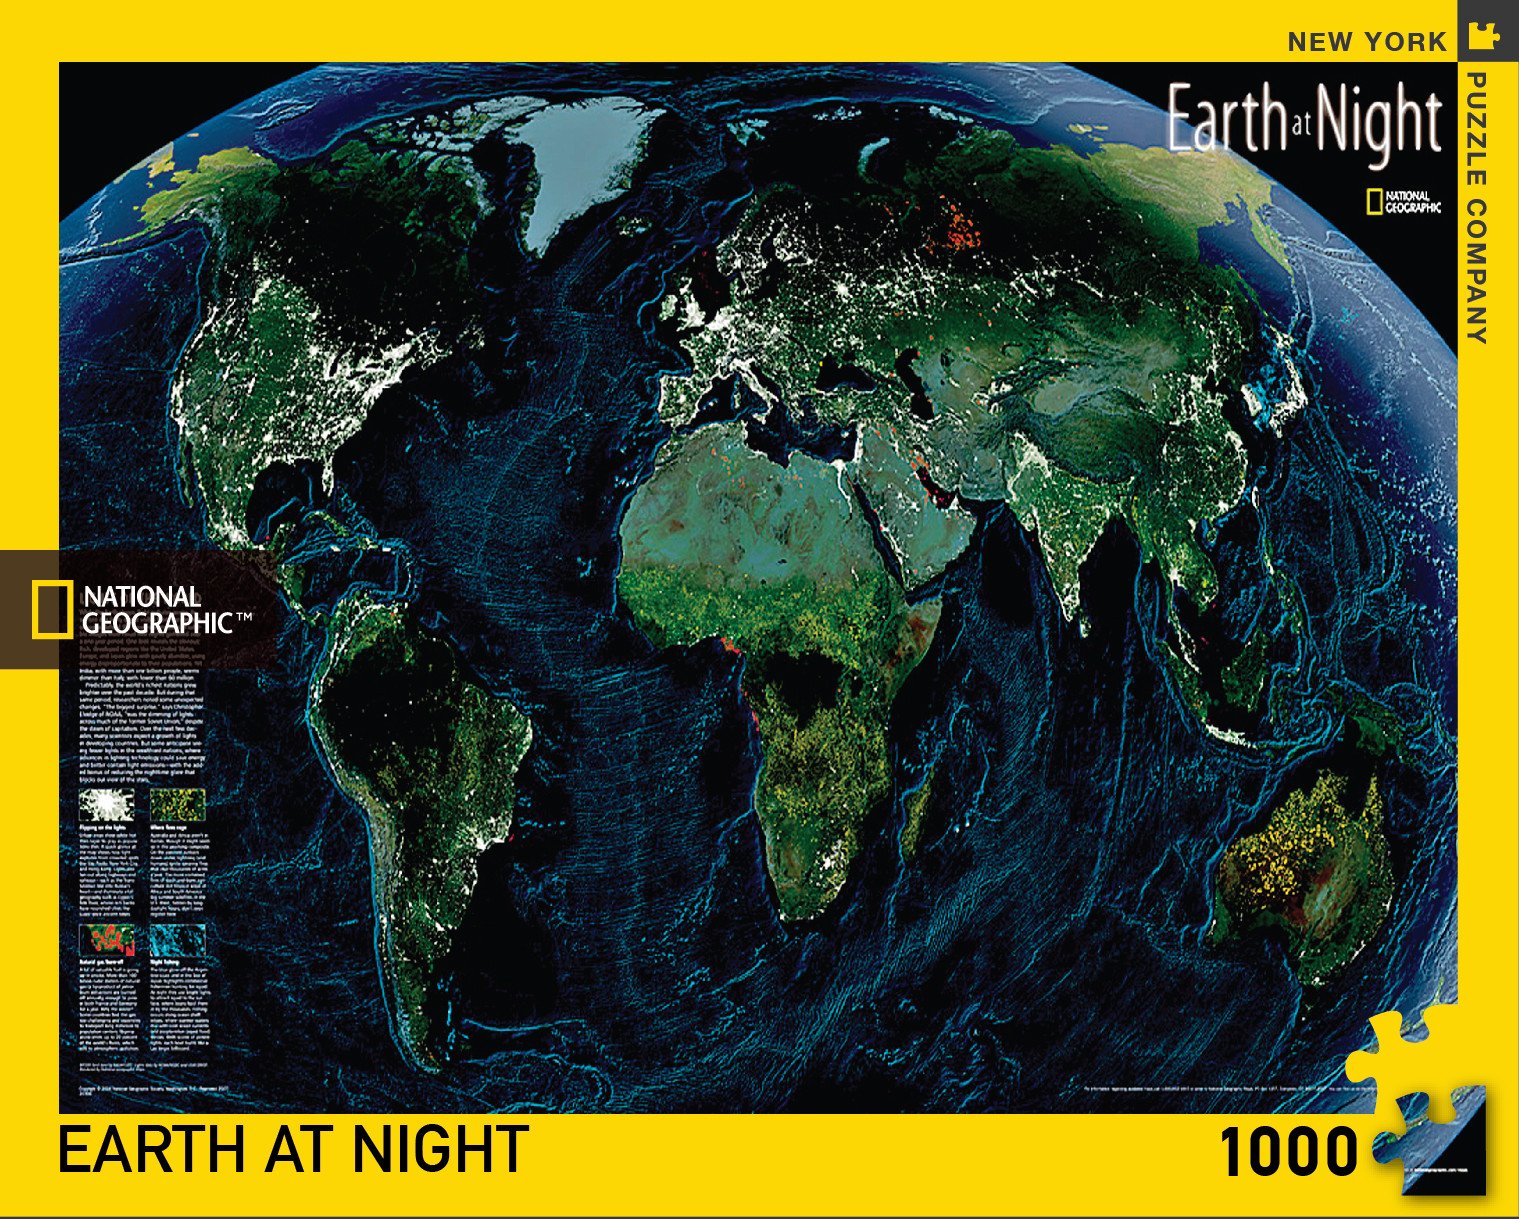 Earth at Night (1000 pc puzzle)